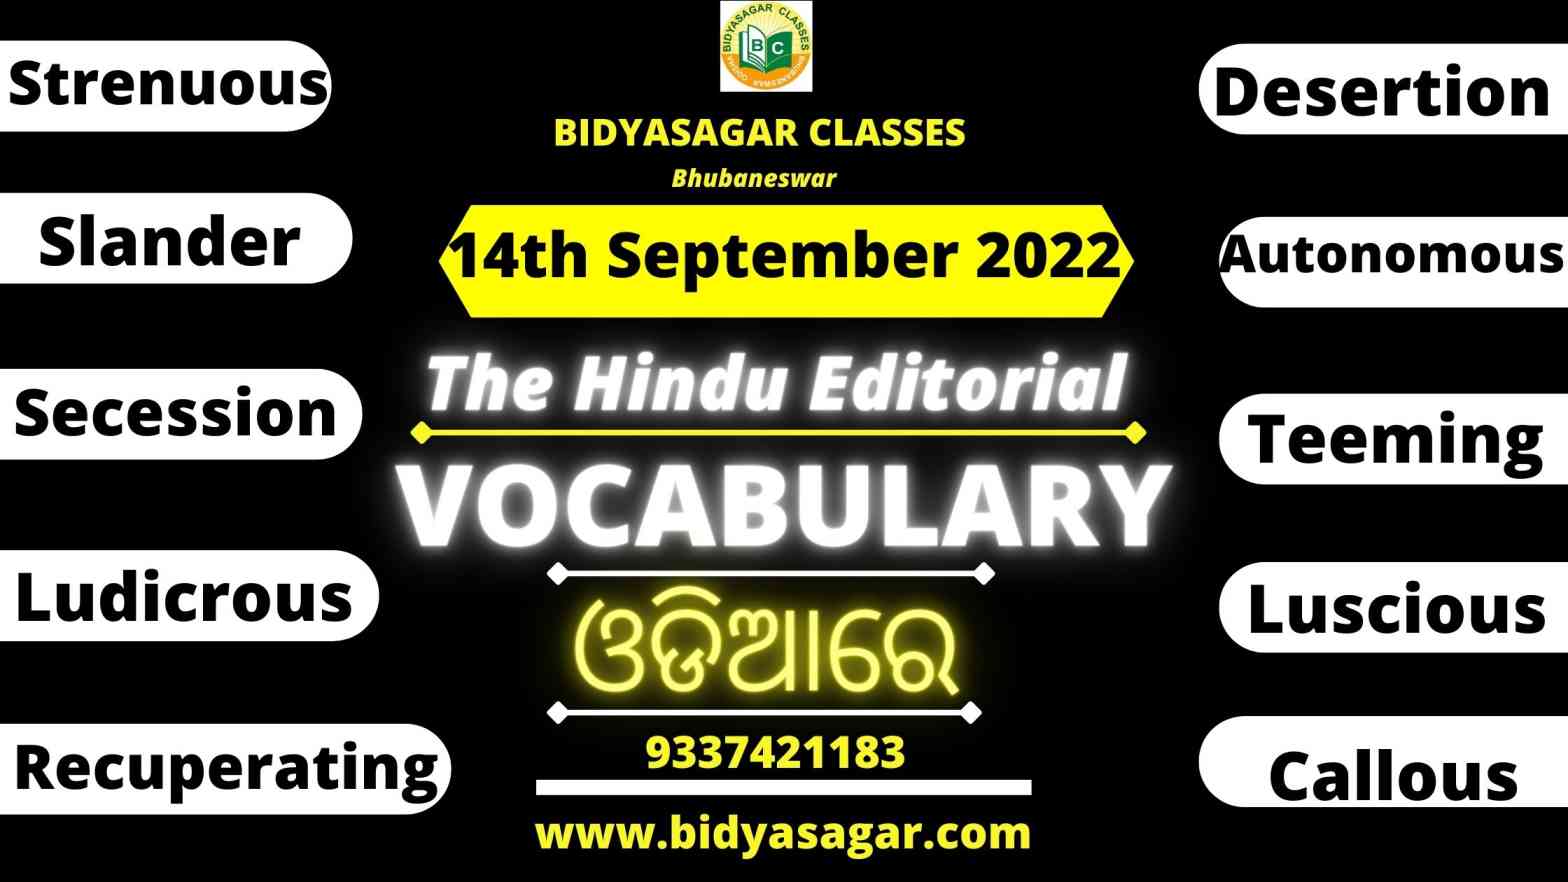 The Hindu Editorial Vocabulary of 14th September 2022